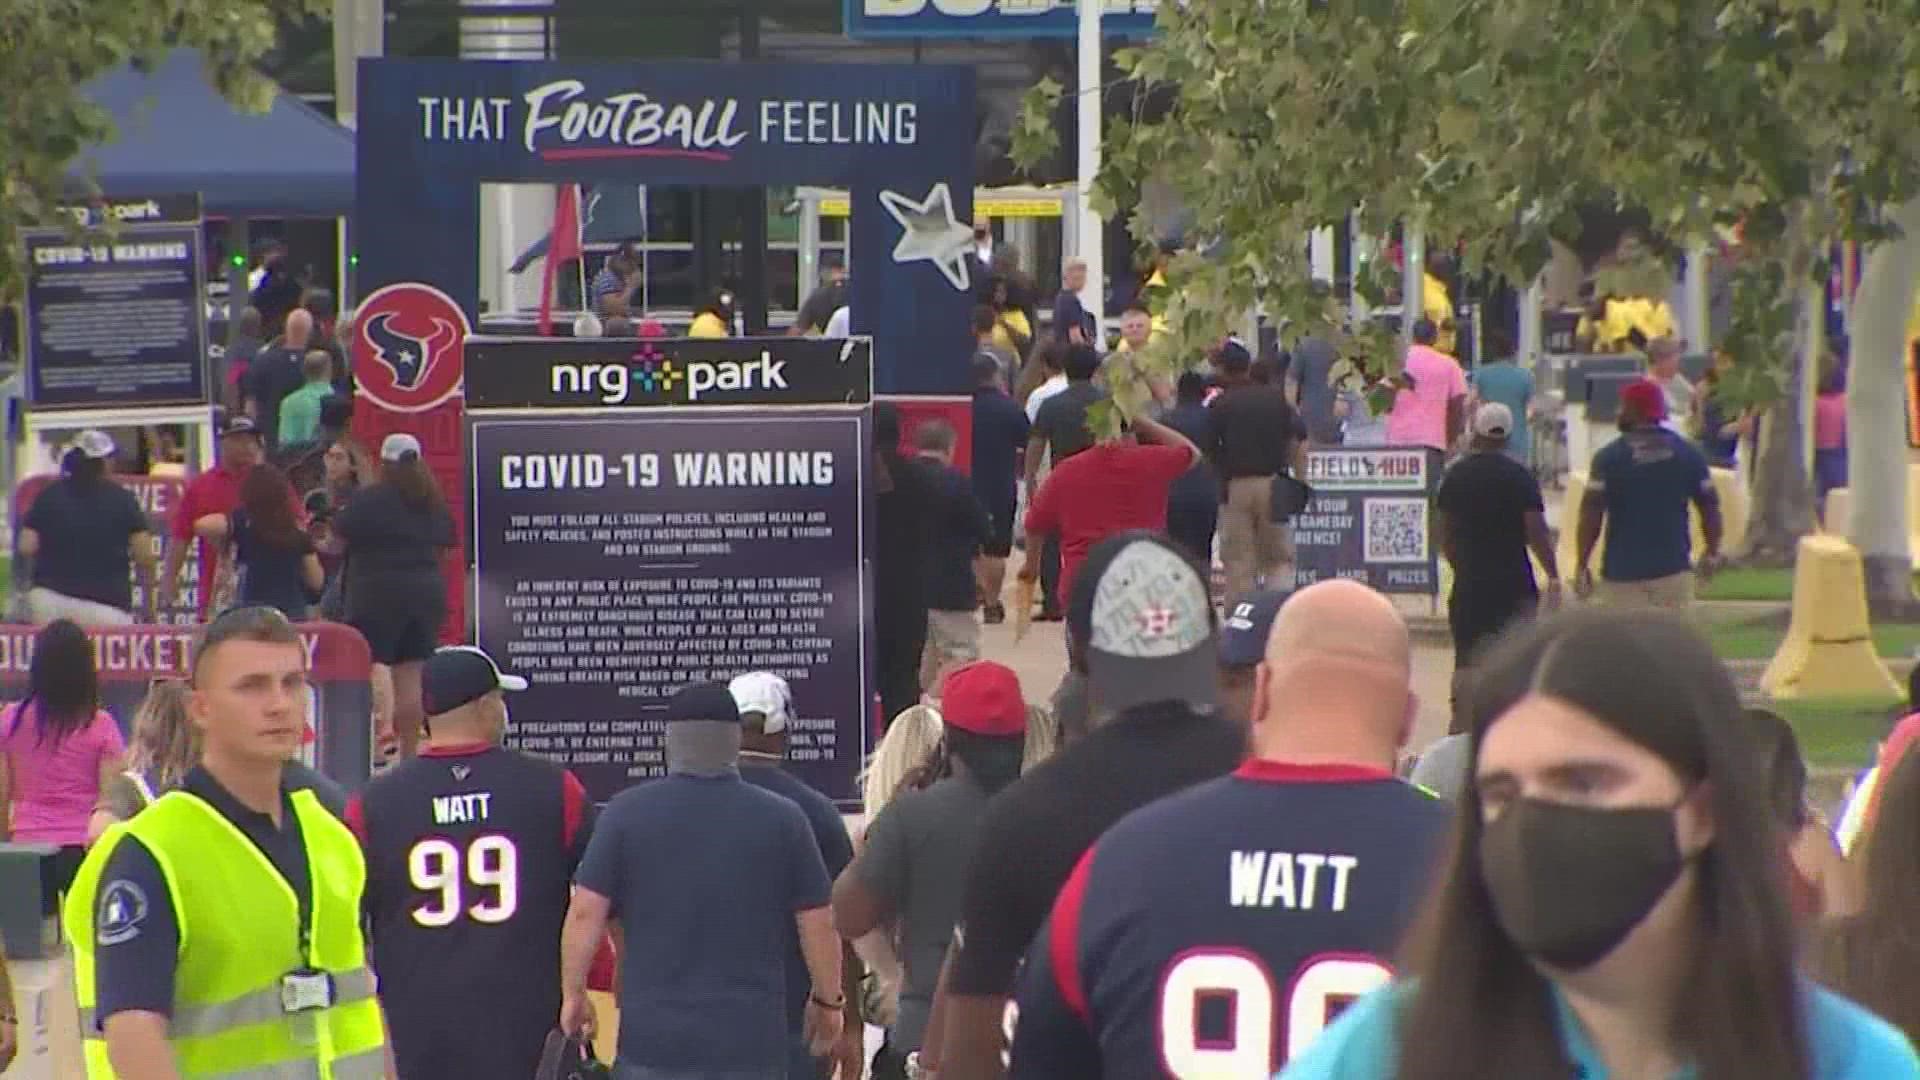 Here's a look at what to expect at NRG Stadium this season.